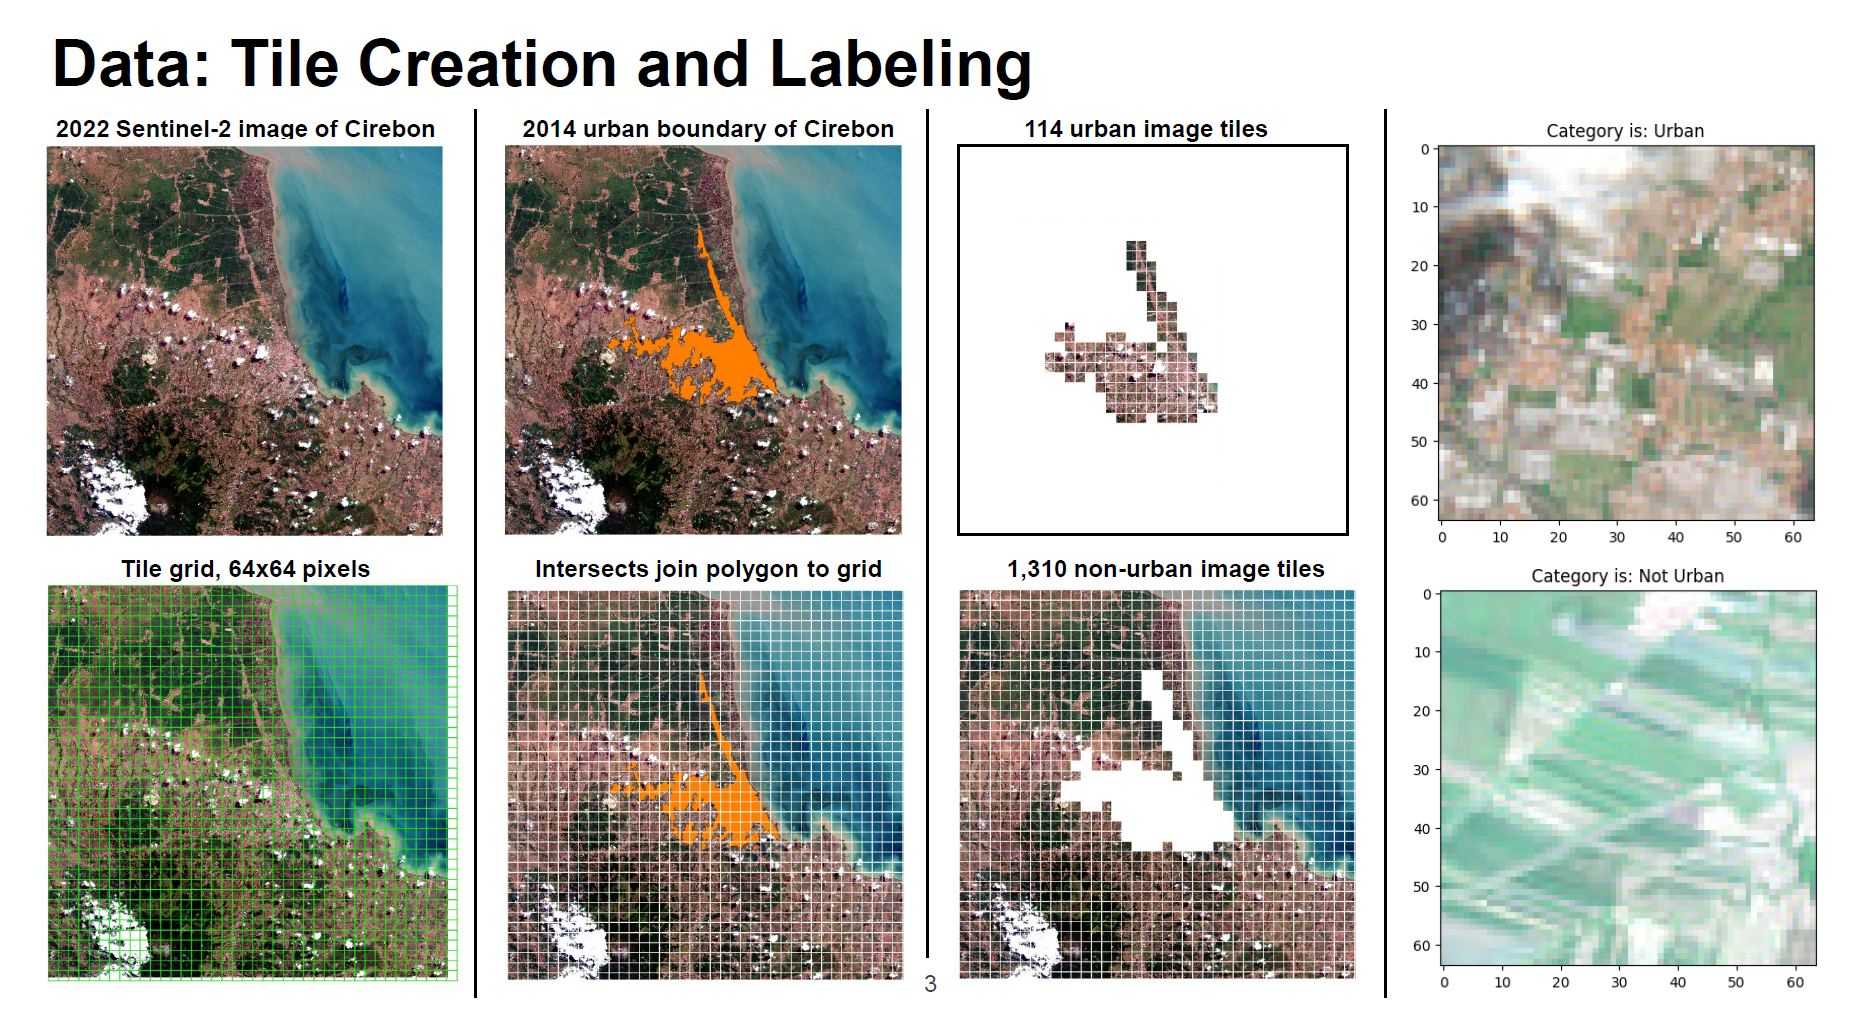 Presentation slide of the steps to create labelled image tiles from a satellite image of Cirebon, Indonesia.